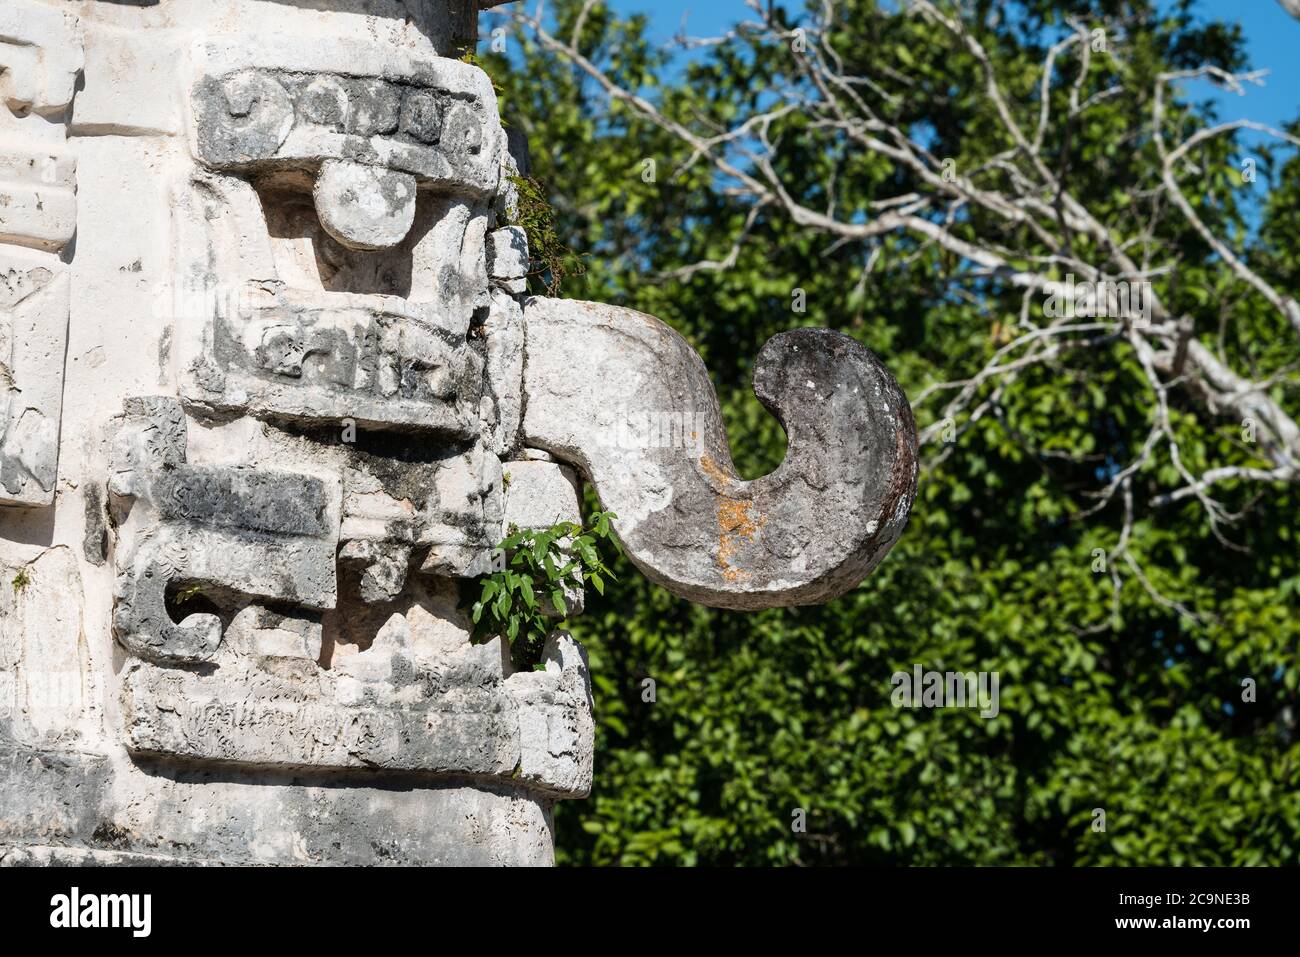 A Chaac mask on the Iglesia or Church the Nunnery Complex in the ruins of the great Mayan city of Chichen Itza, Yucatan, Mexico. Stock Photo